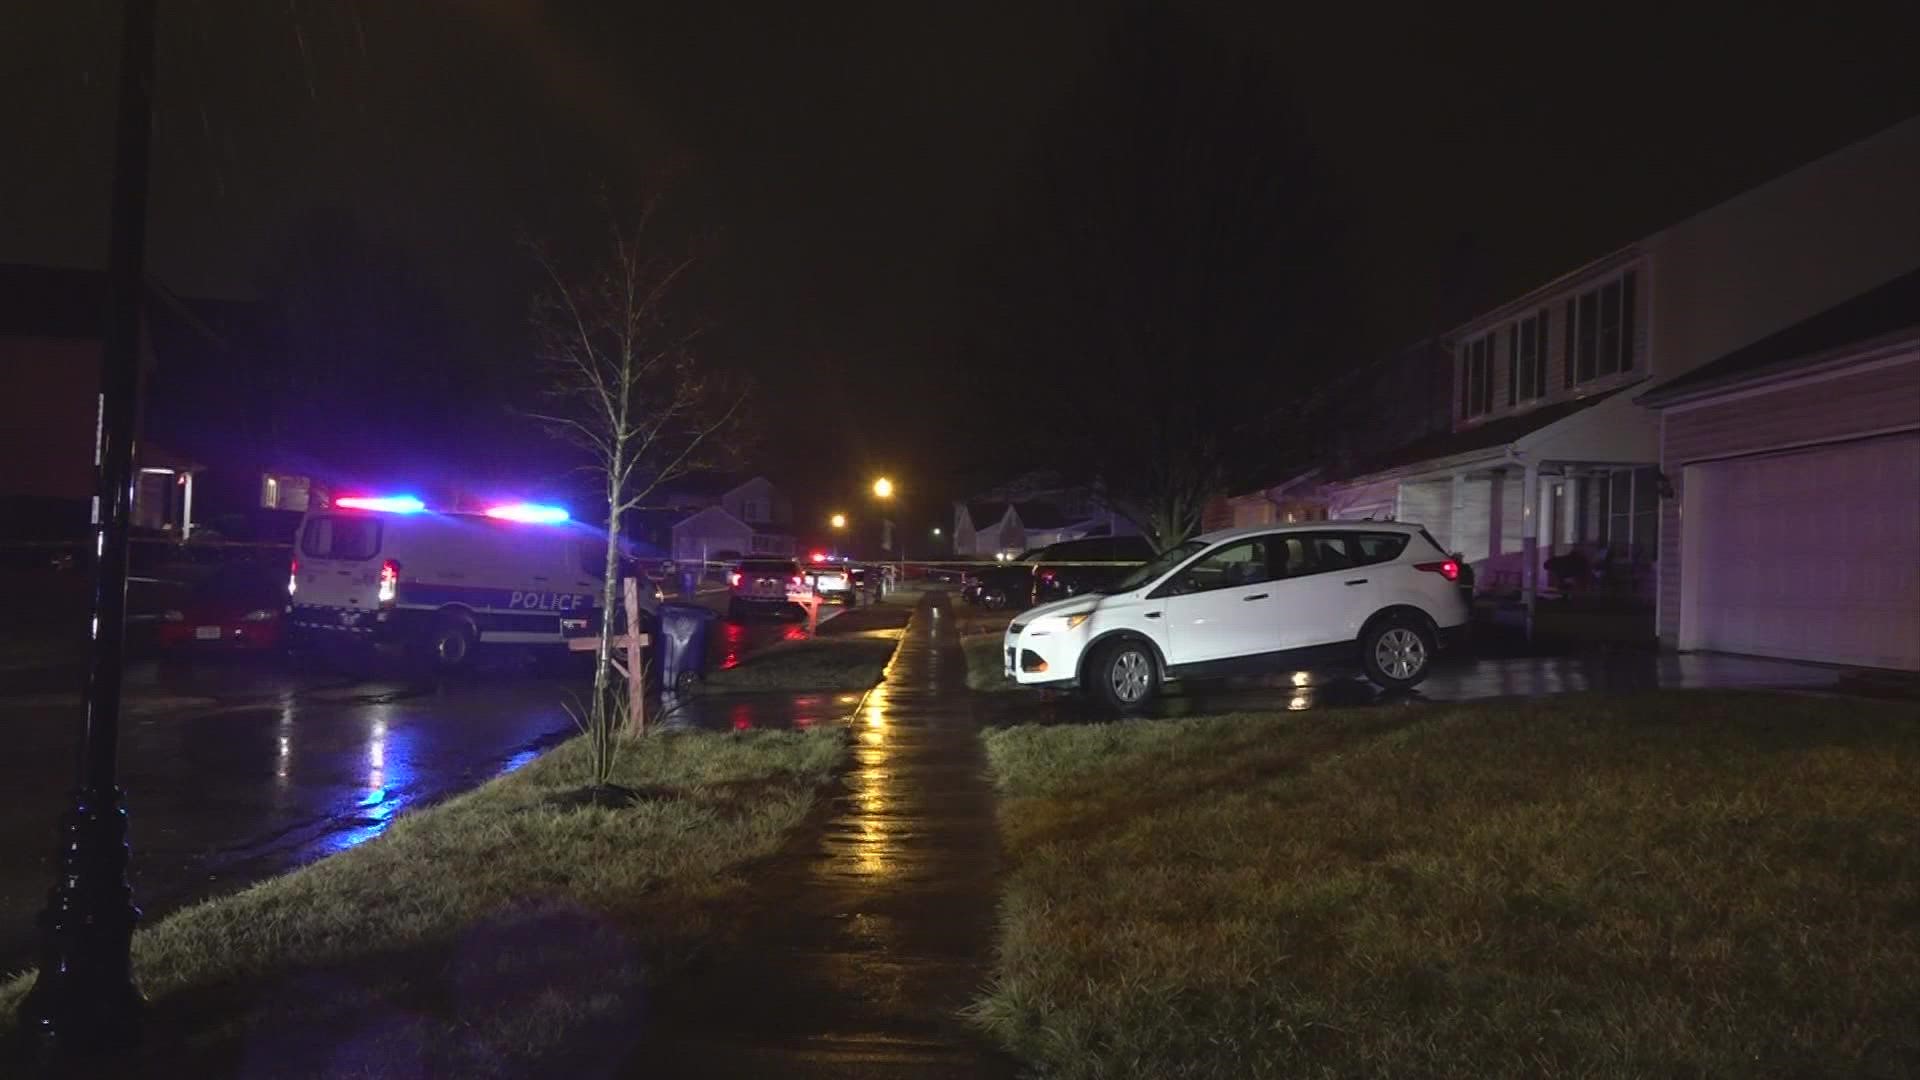 The shooting happened in the 2800 block of Marblewood Drive just before 11:30 p.m., according to Columbus Police.